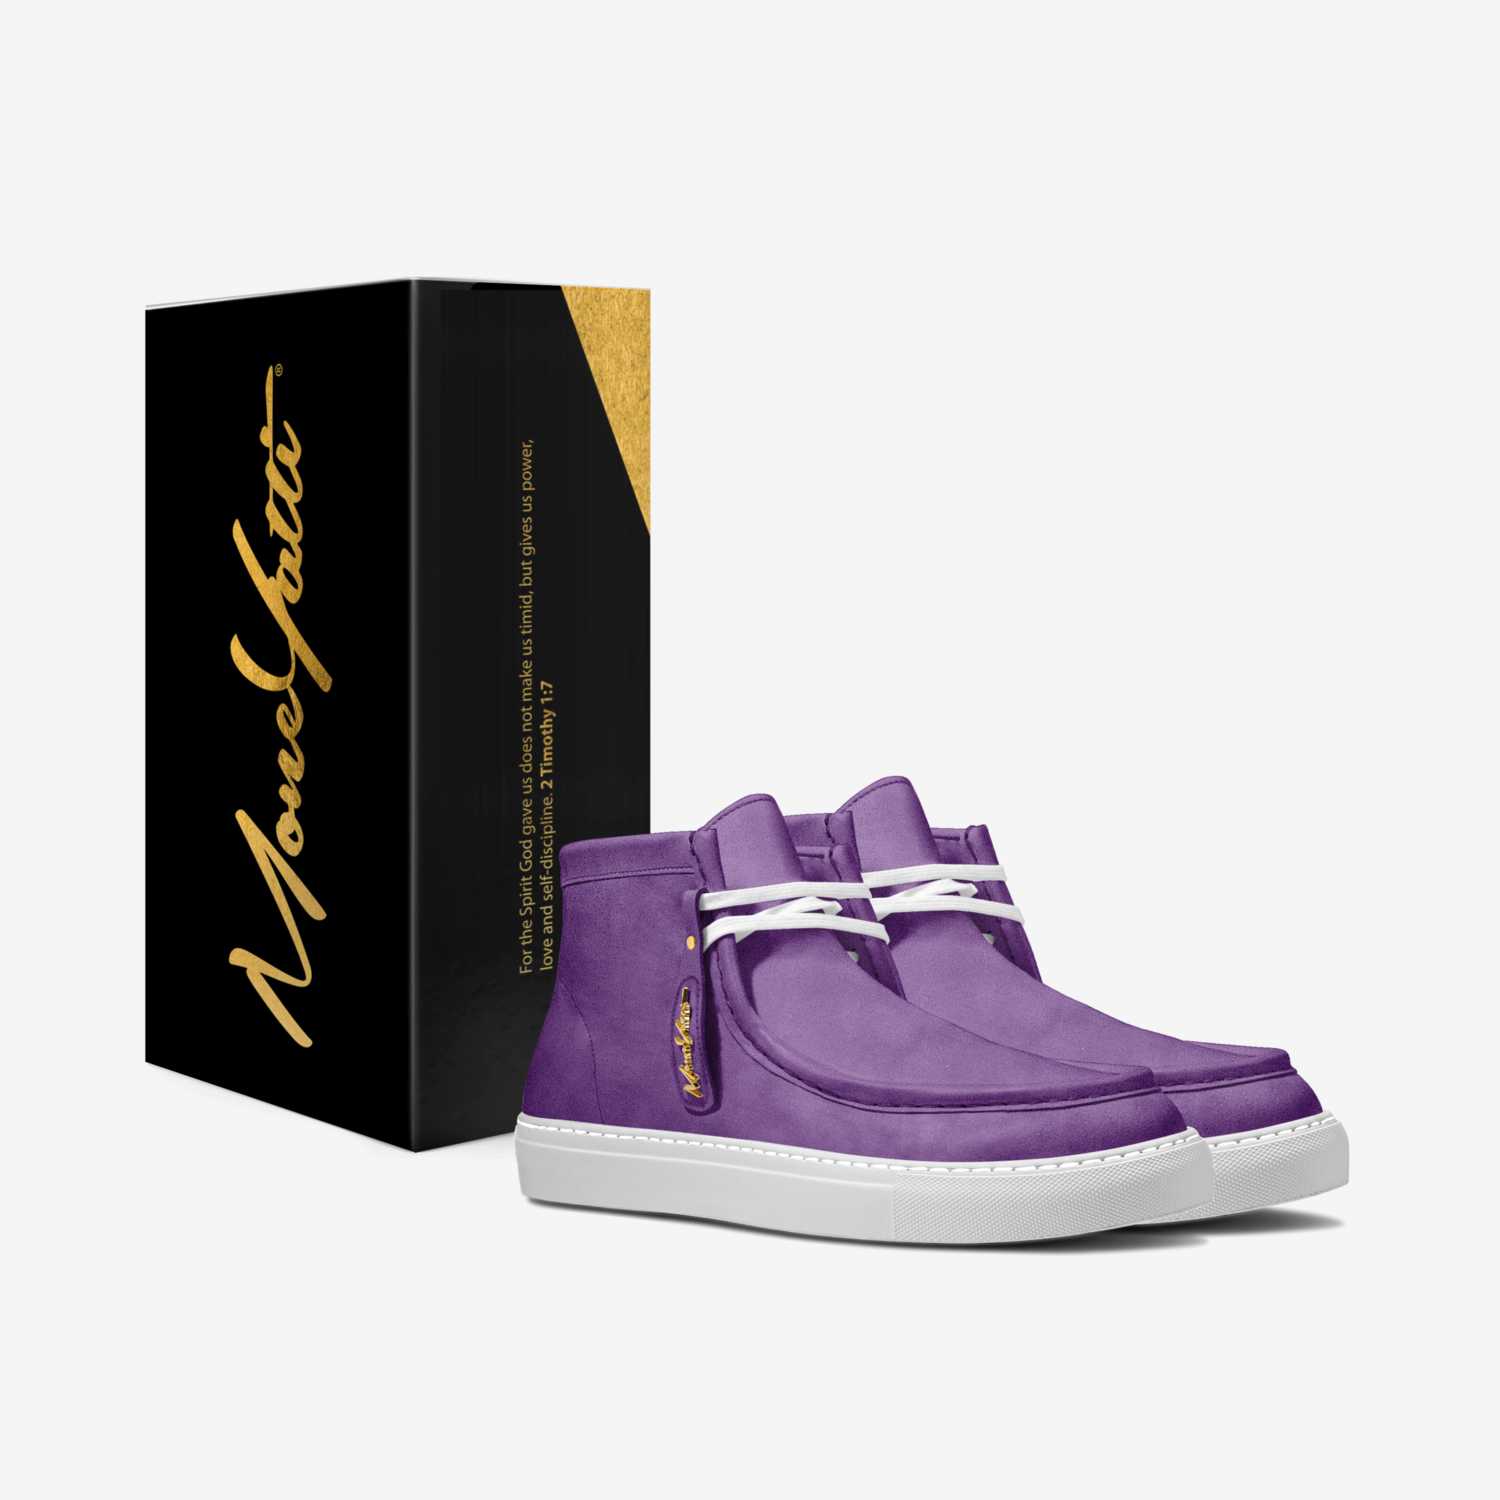 LUX SUEDE 010 custom made in Italy shoes by Moneyatti Brand | Box view